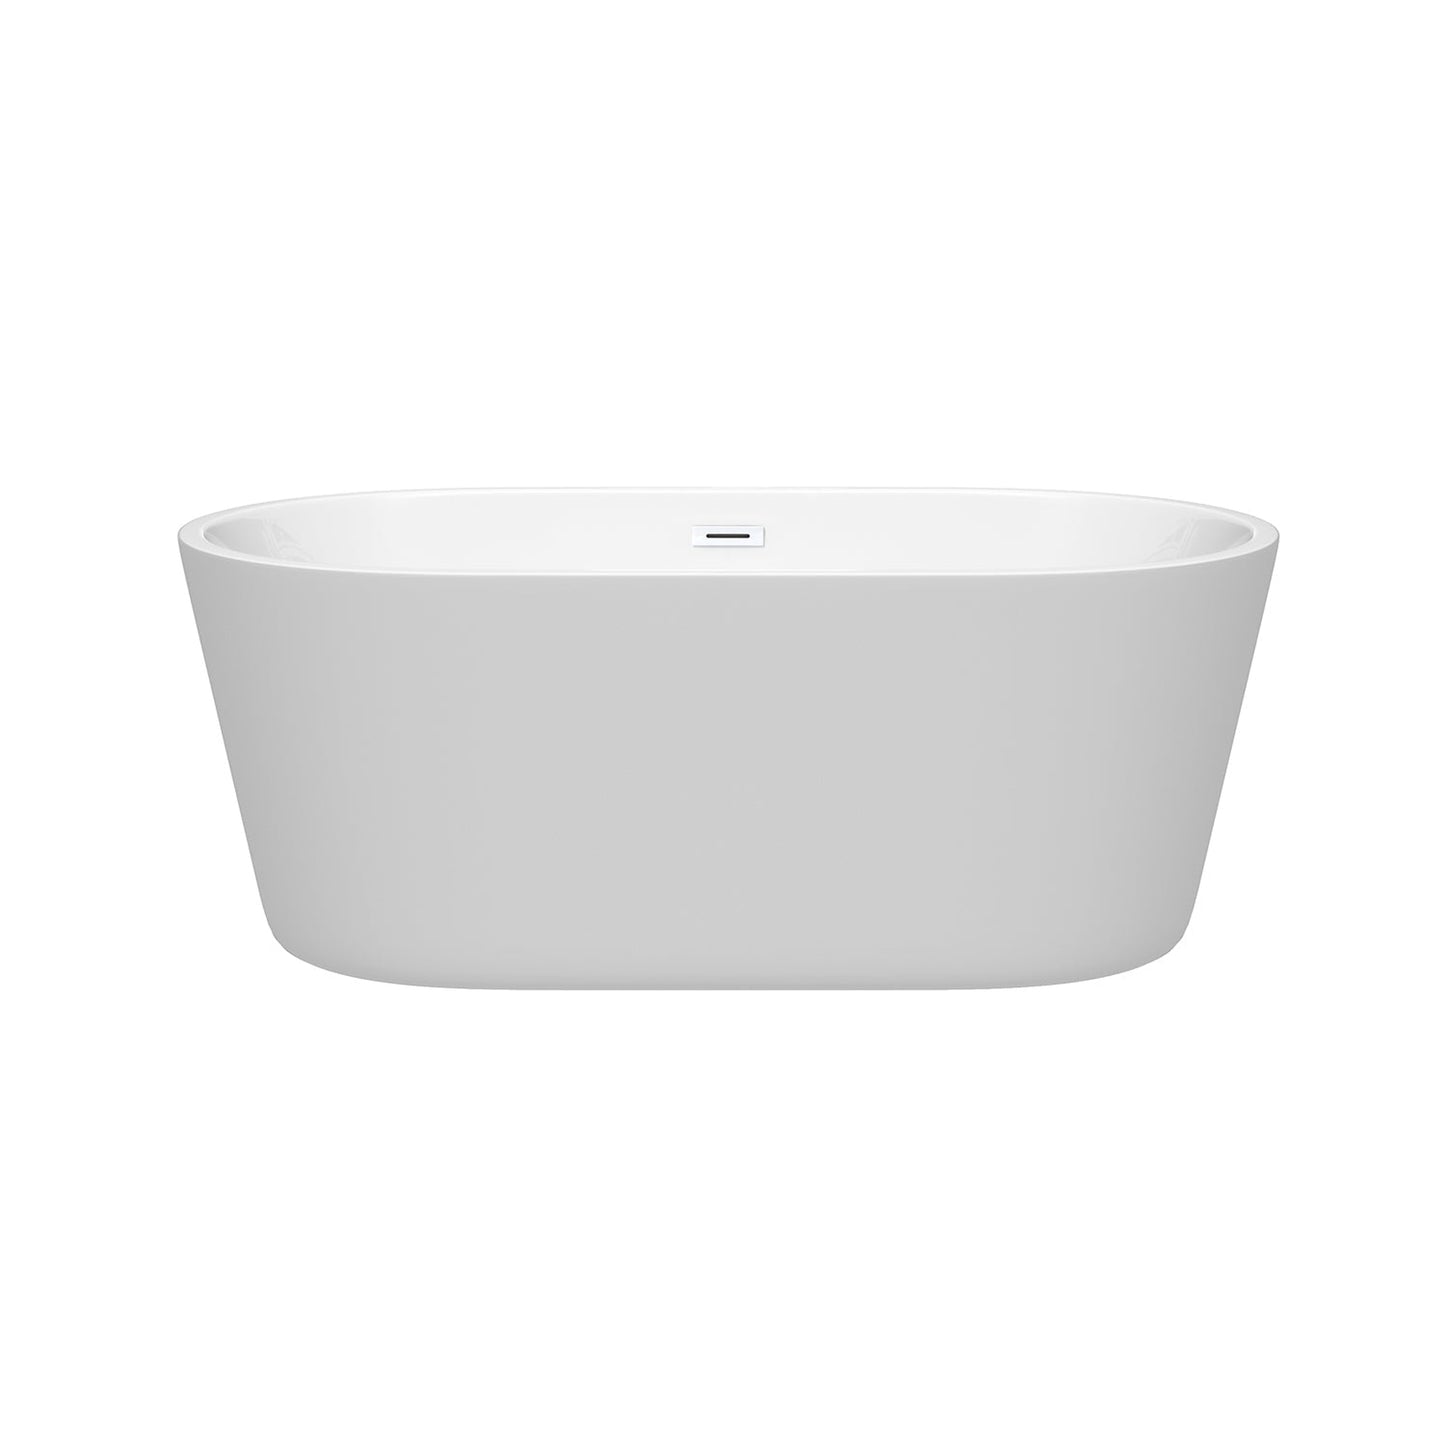 Wyndham Collection Carissa 60" Freestanding Bathtub in White With Shiny White Drain and Overflow Trim